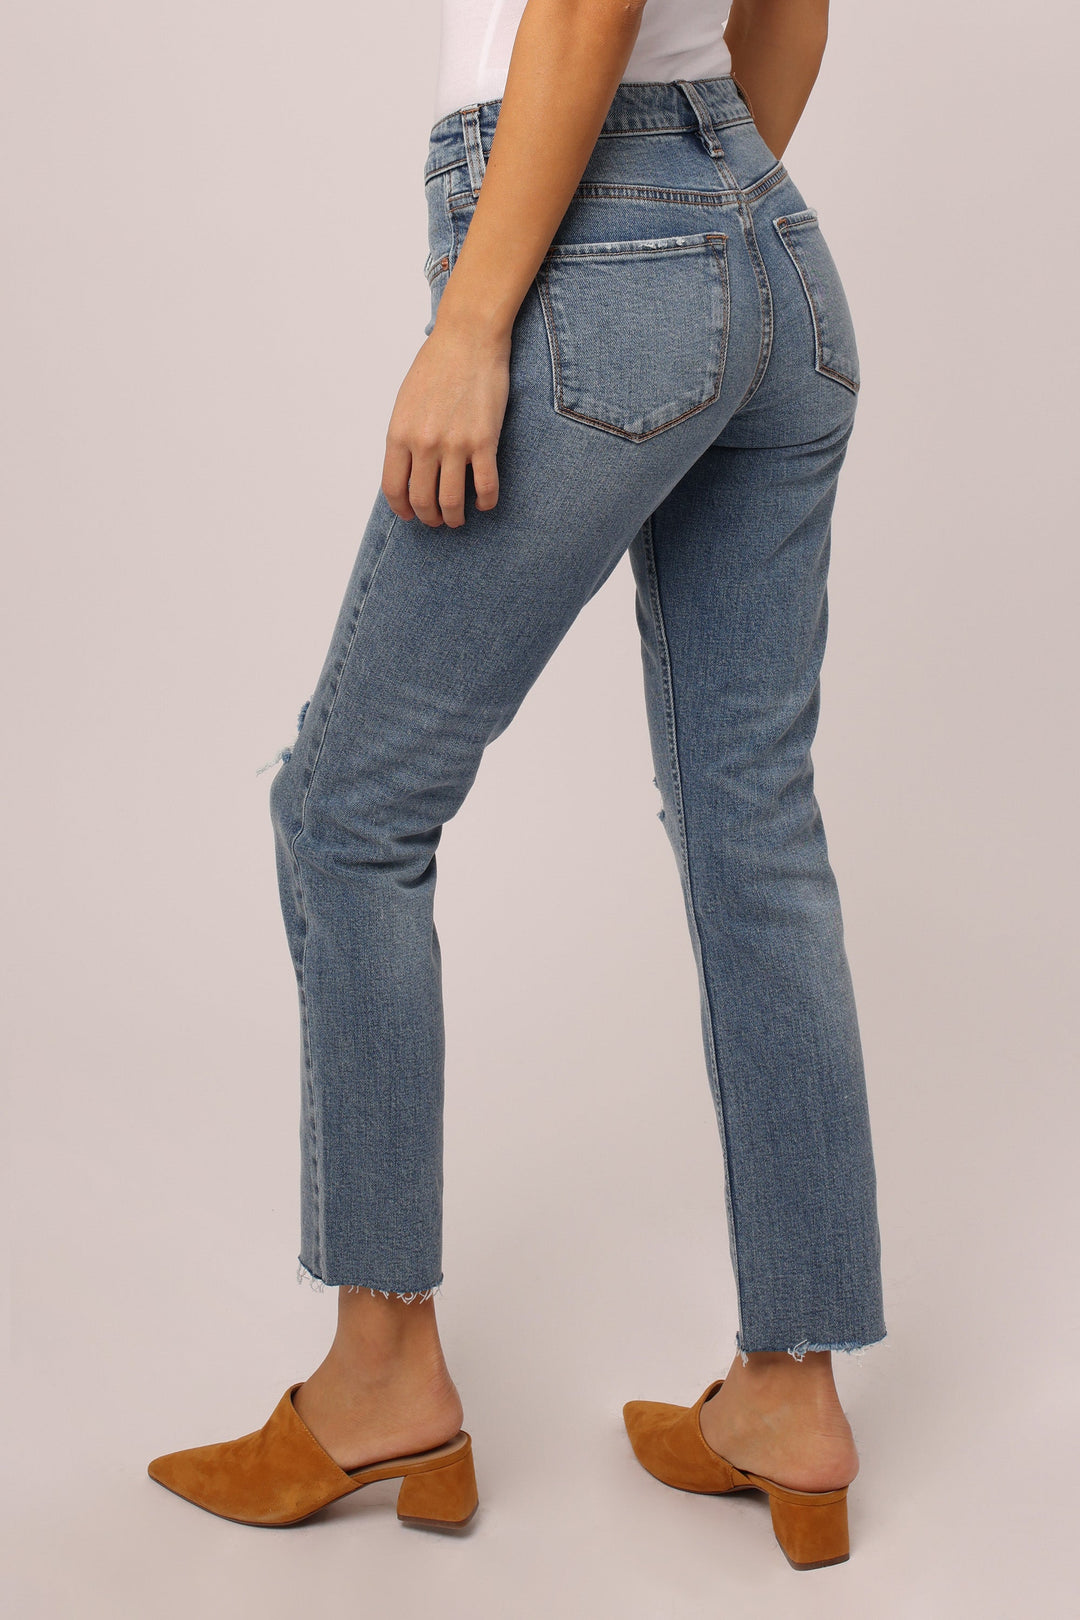 image of a female model wearing a BLAIRE HIGH RISE SLIM STRAIGHT JEANS LINFIELD JEANS